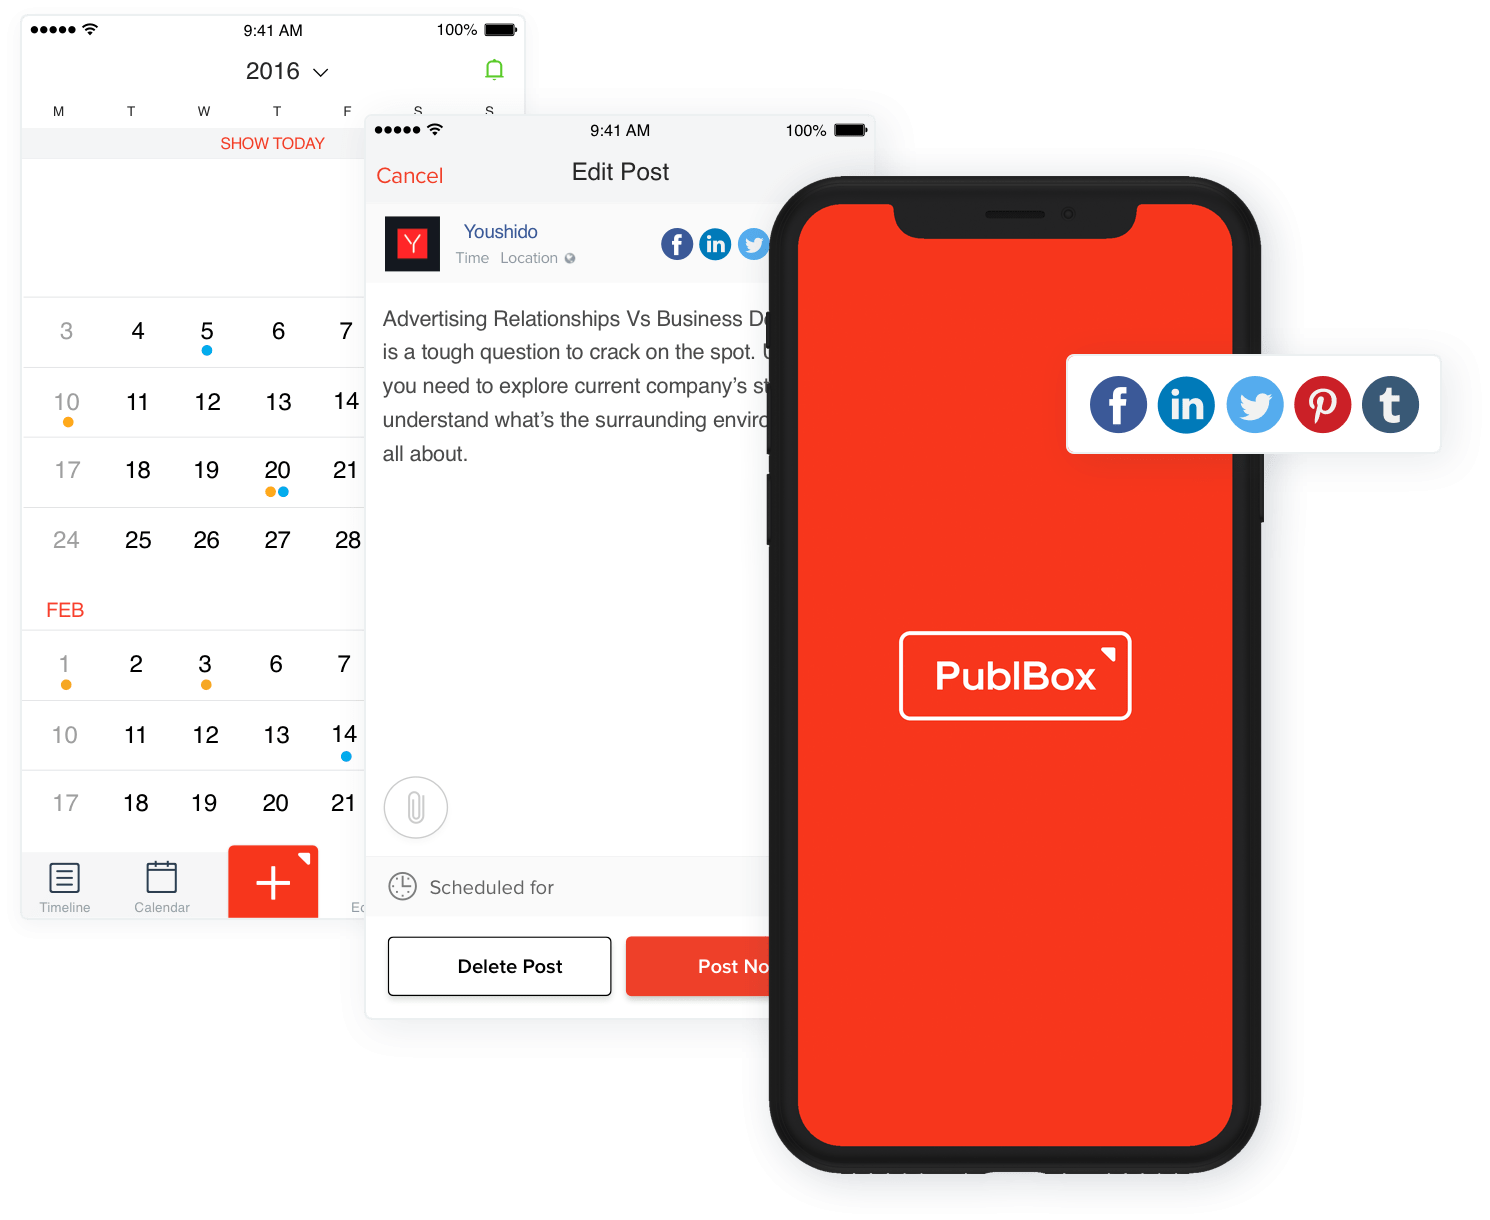 Screenshots: PublBox on mobile devices